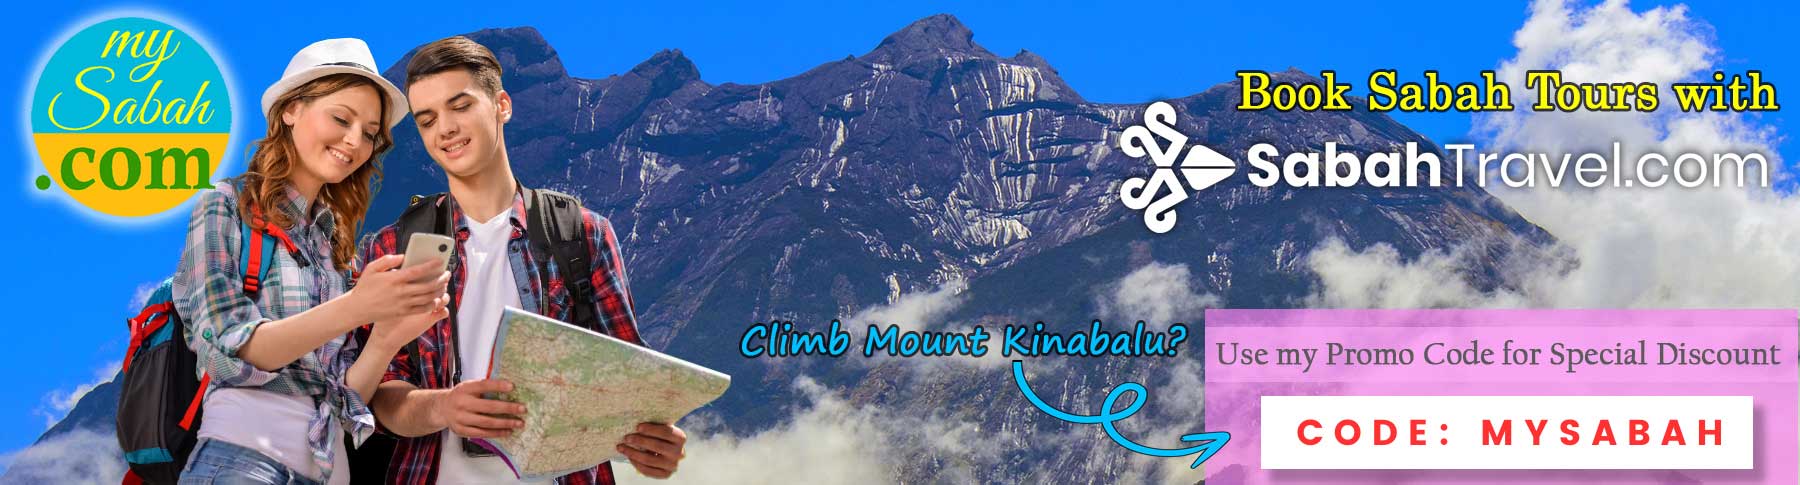 Tour package to Kinabalu Park